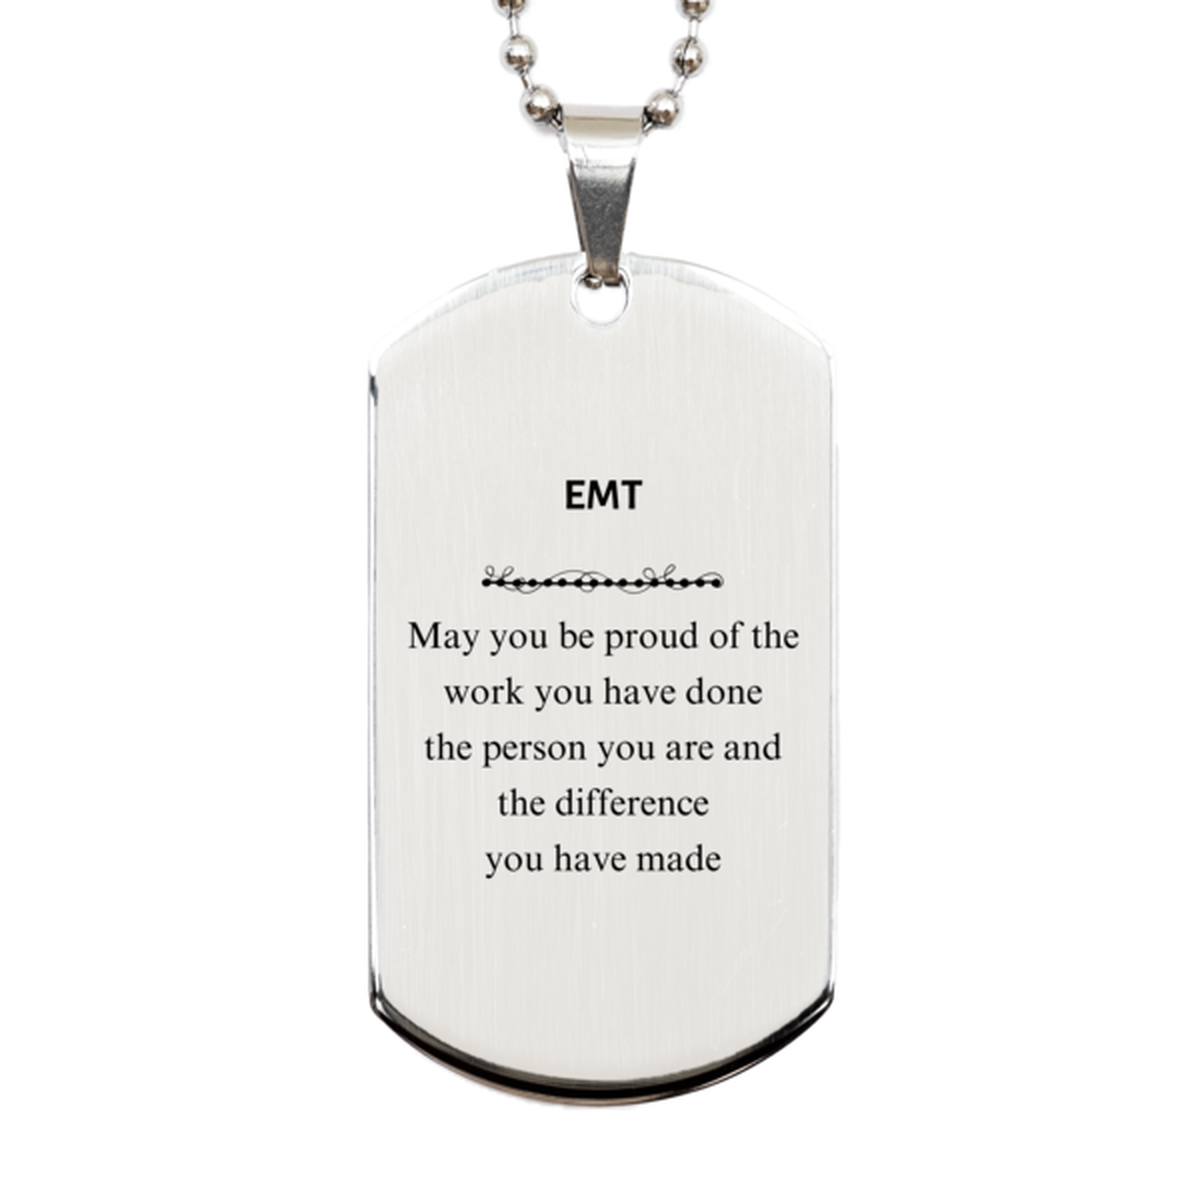 EMT May you be proud of the work you have done, Retirement EMT Silver Dog Tag for Colleague Appreciation Gifts Amazing for EMT